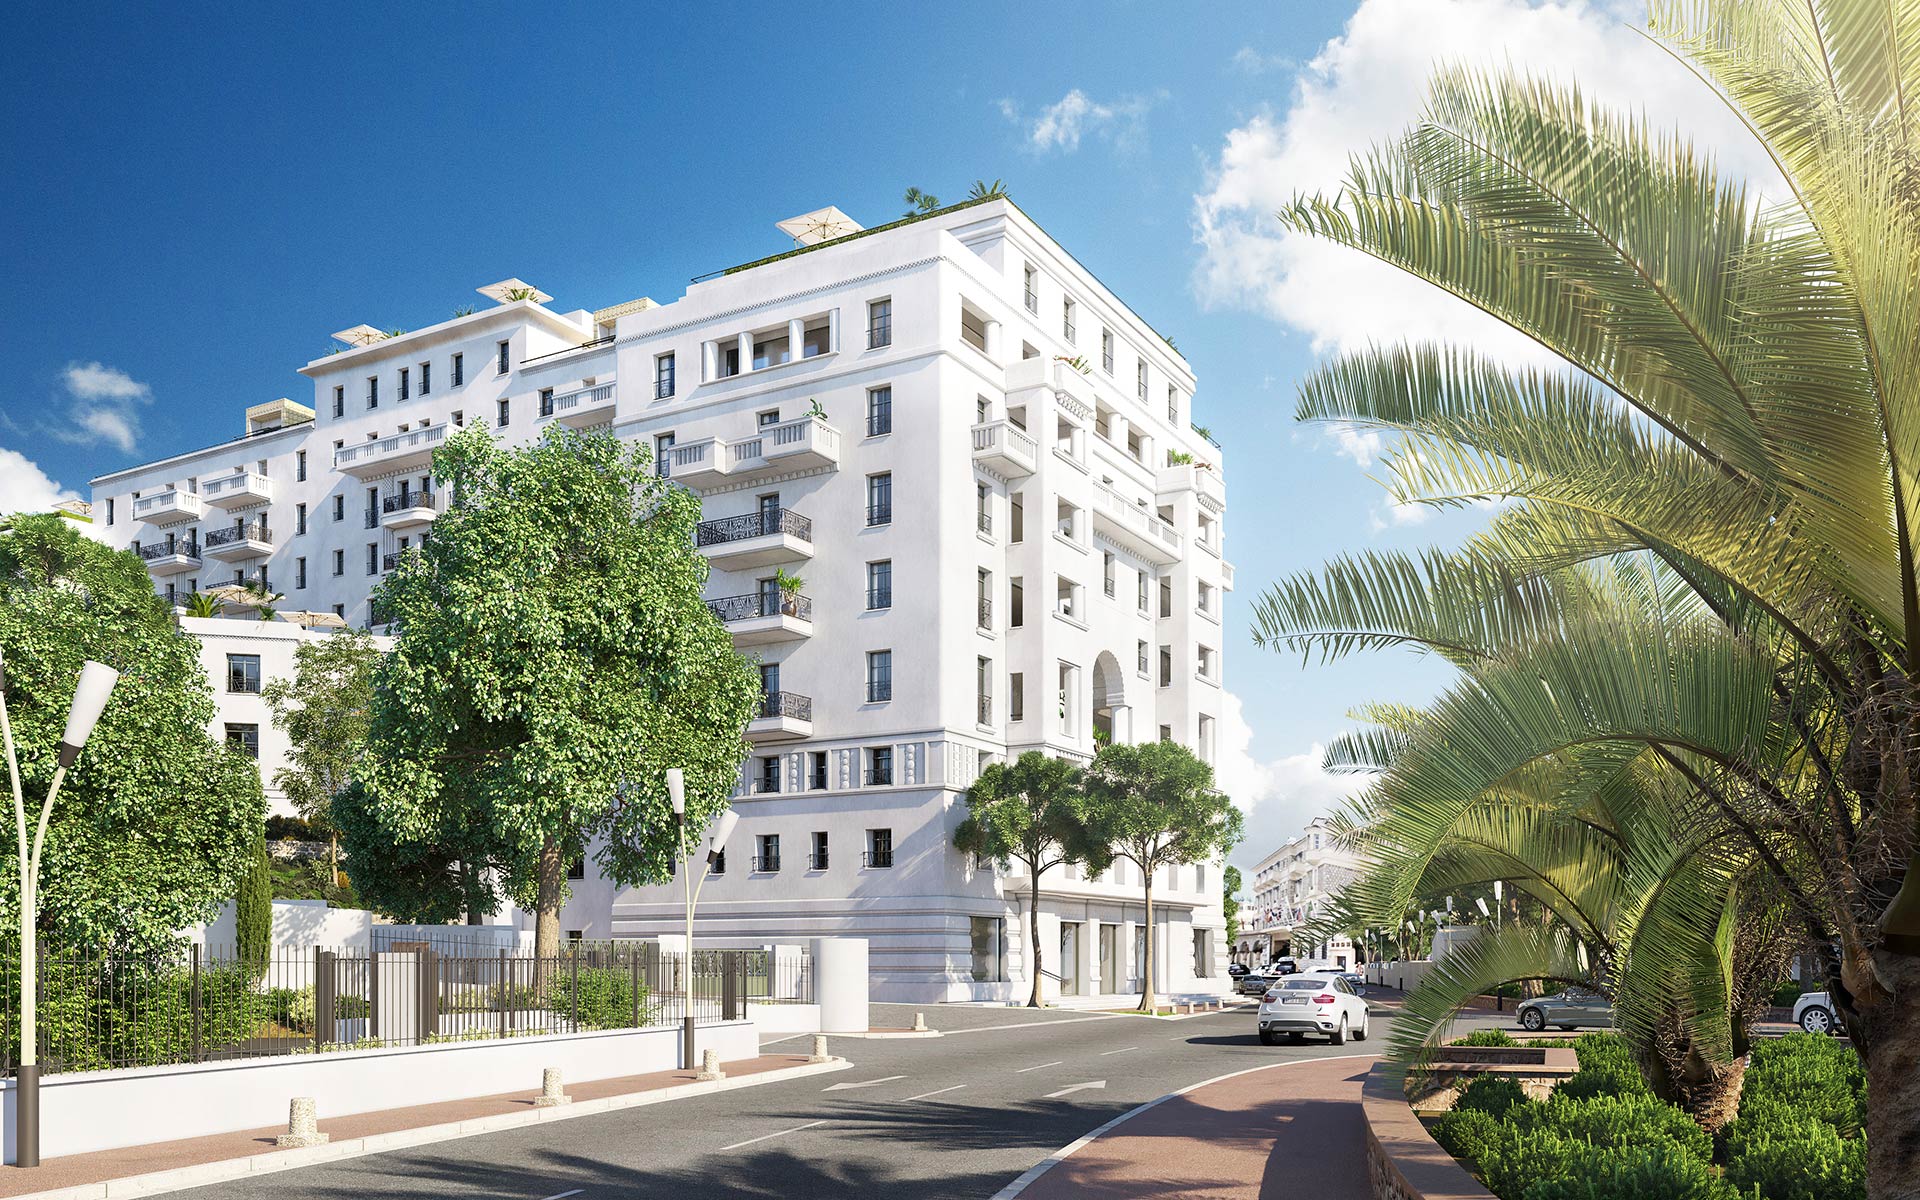 3D Exterior perspective of a hotel in Cannes - Architecture contest